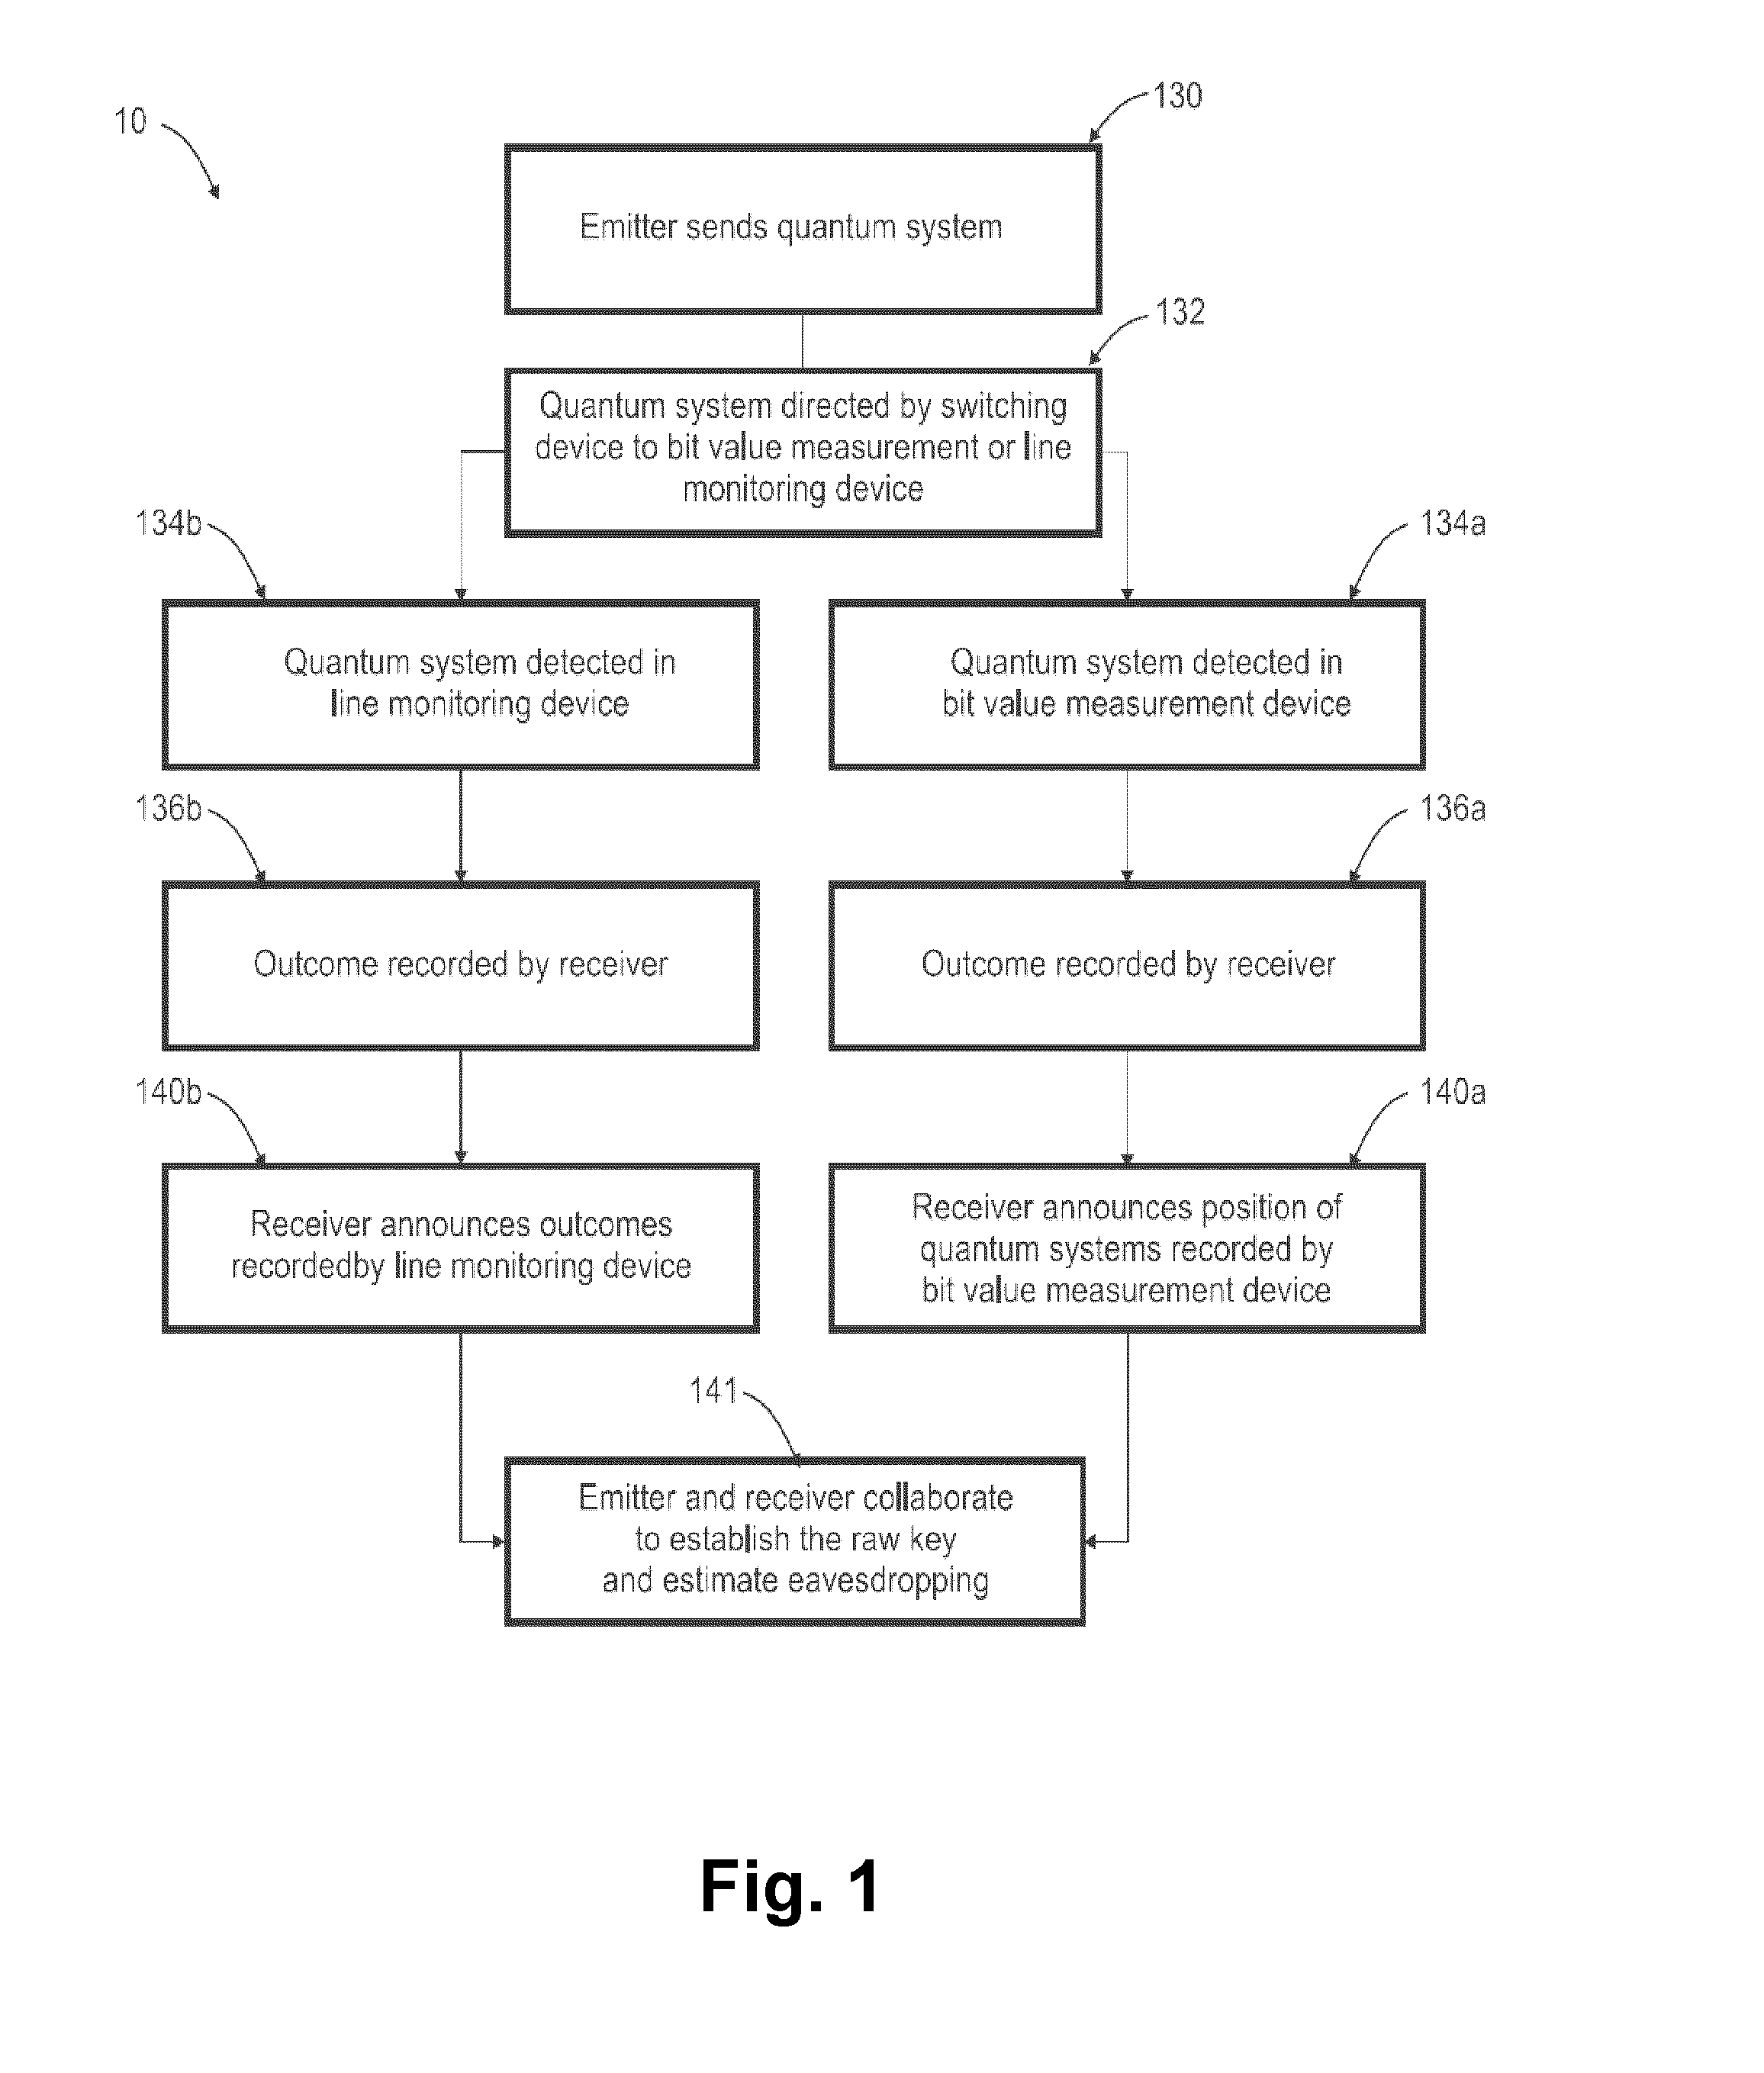 Apparatus and method for distributing a string of secret bits over a quantum channel